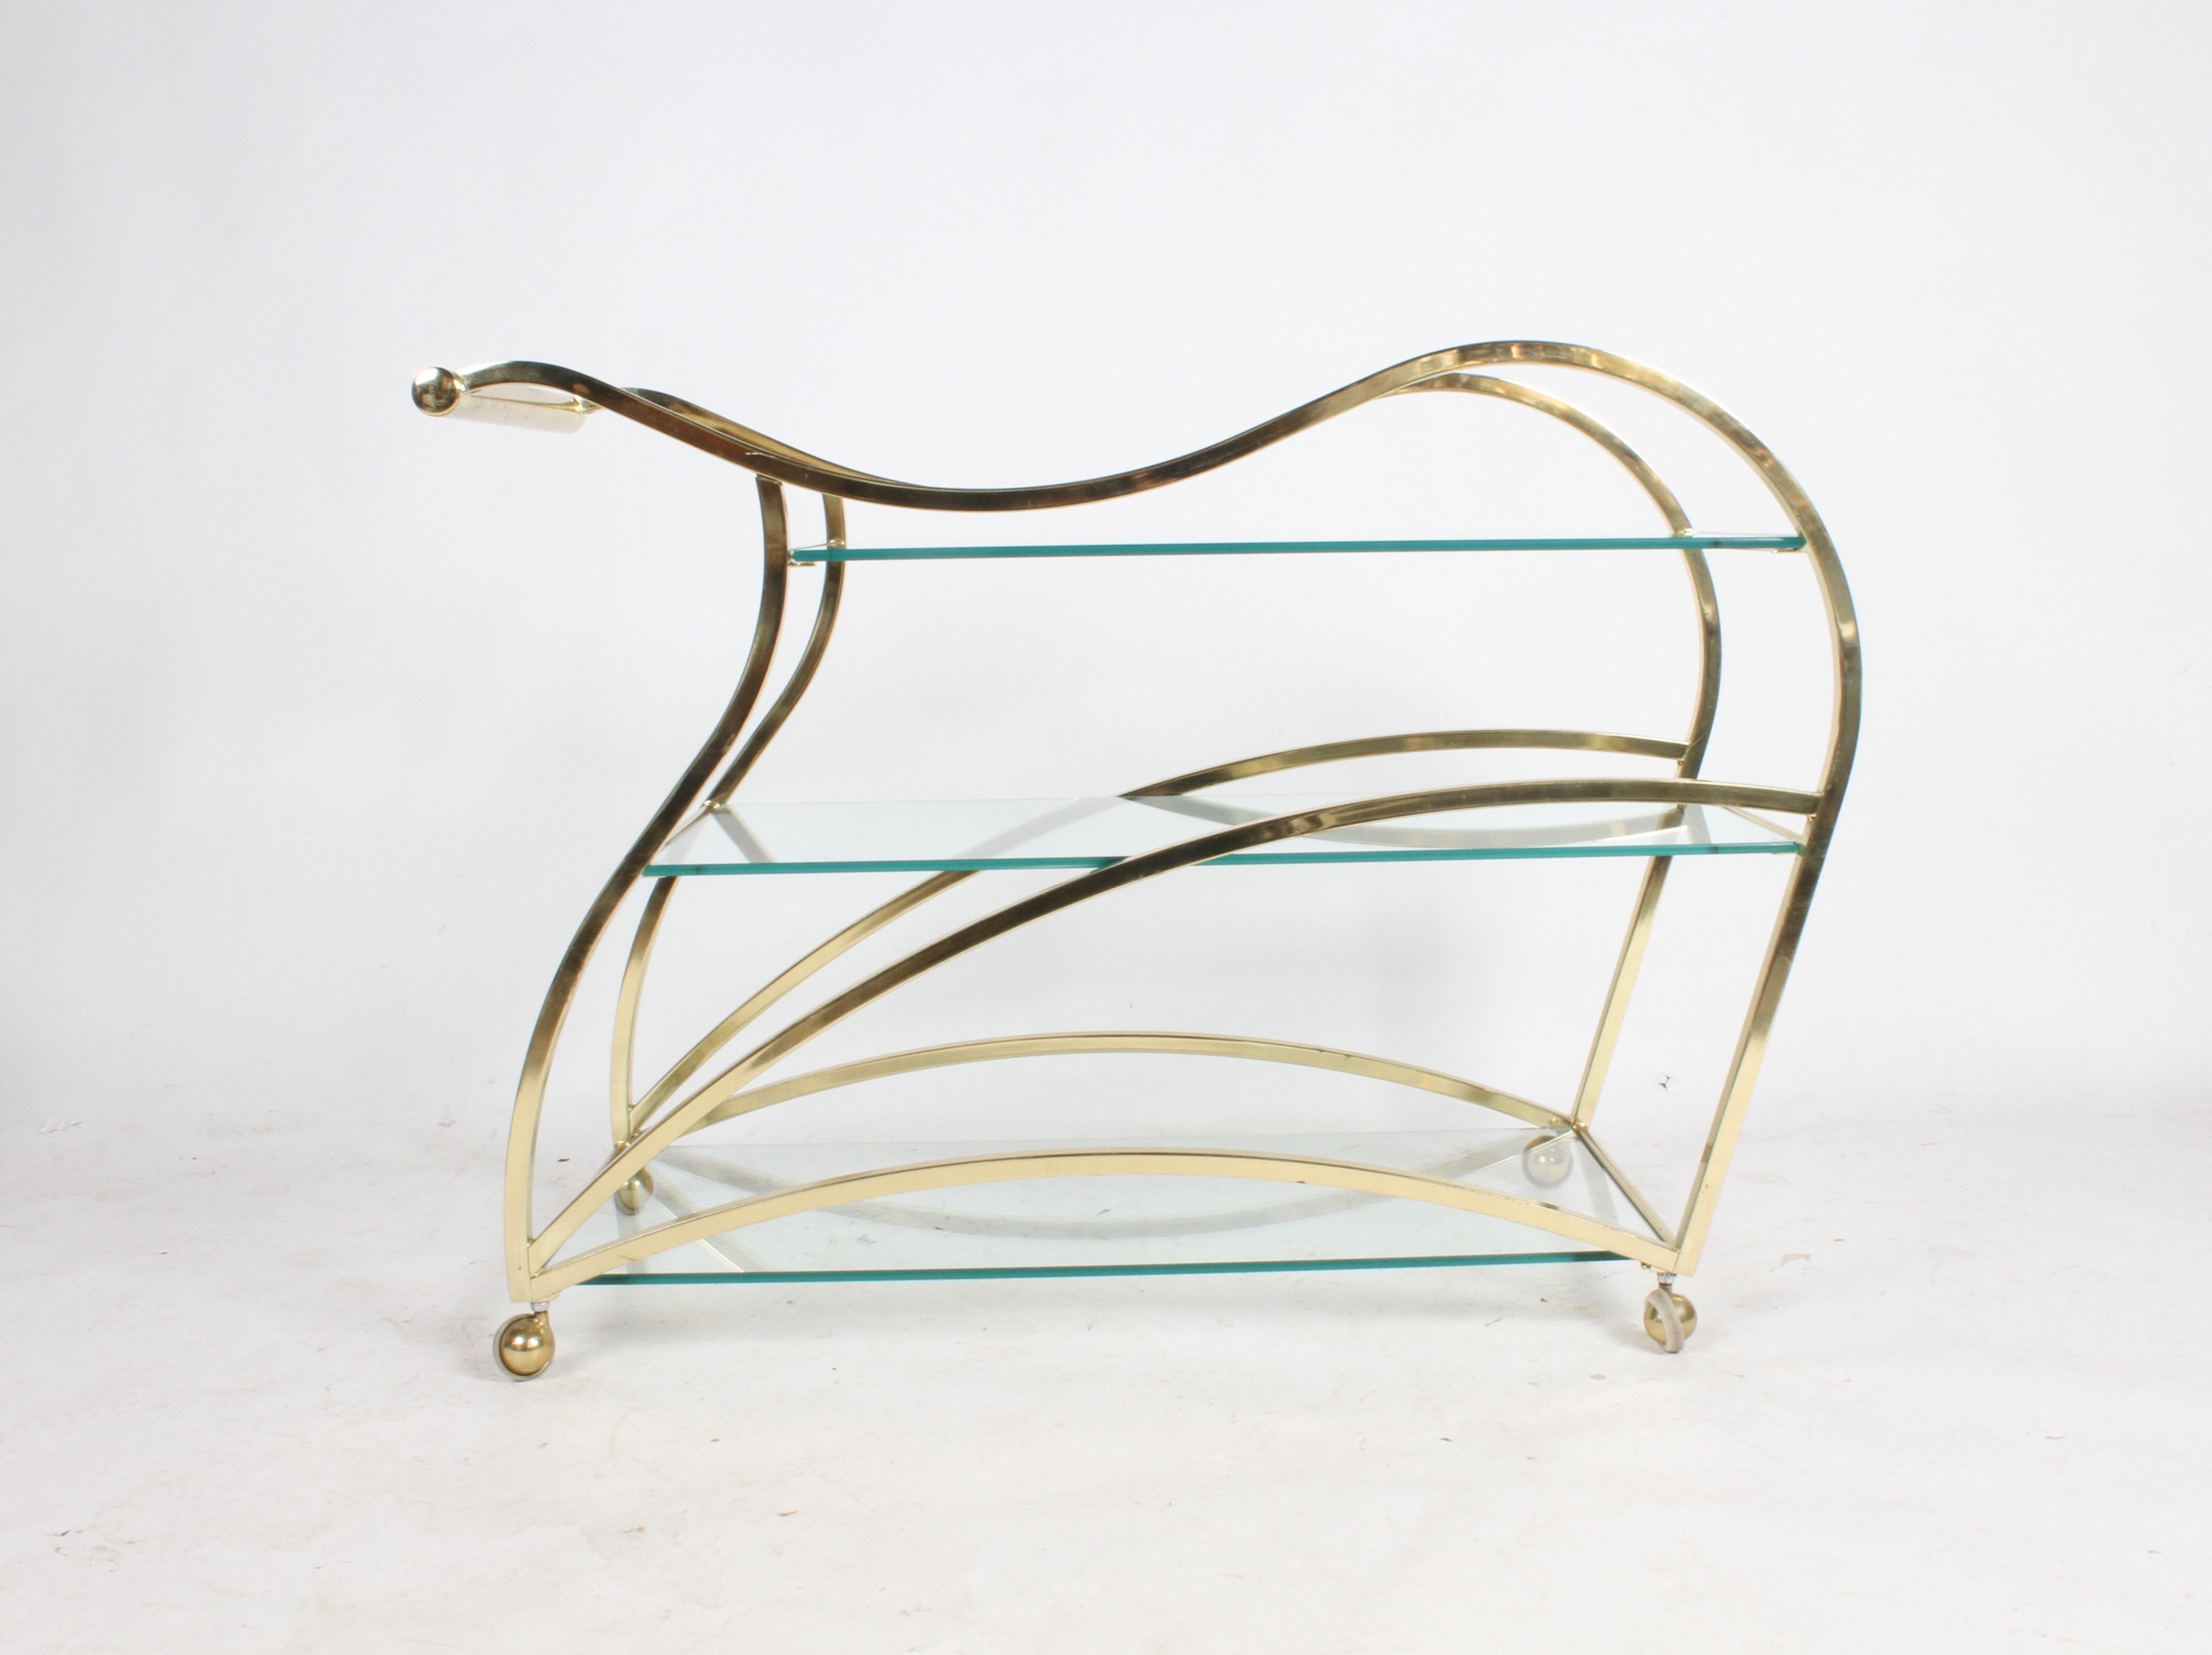 DIA or Design Institute of America designed brass sculptural bar cart, a true piece of art. This rarely seen cart is in very nice original condition. Minor wear to brass on handles, few light scratches to glass, light patina. In the style of Milo